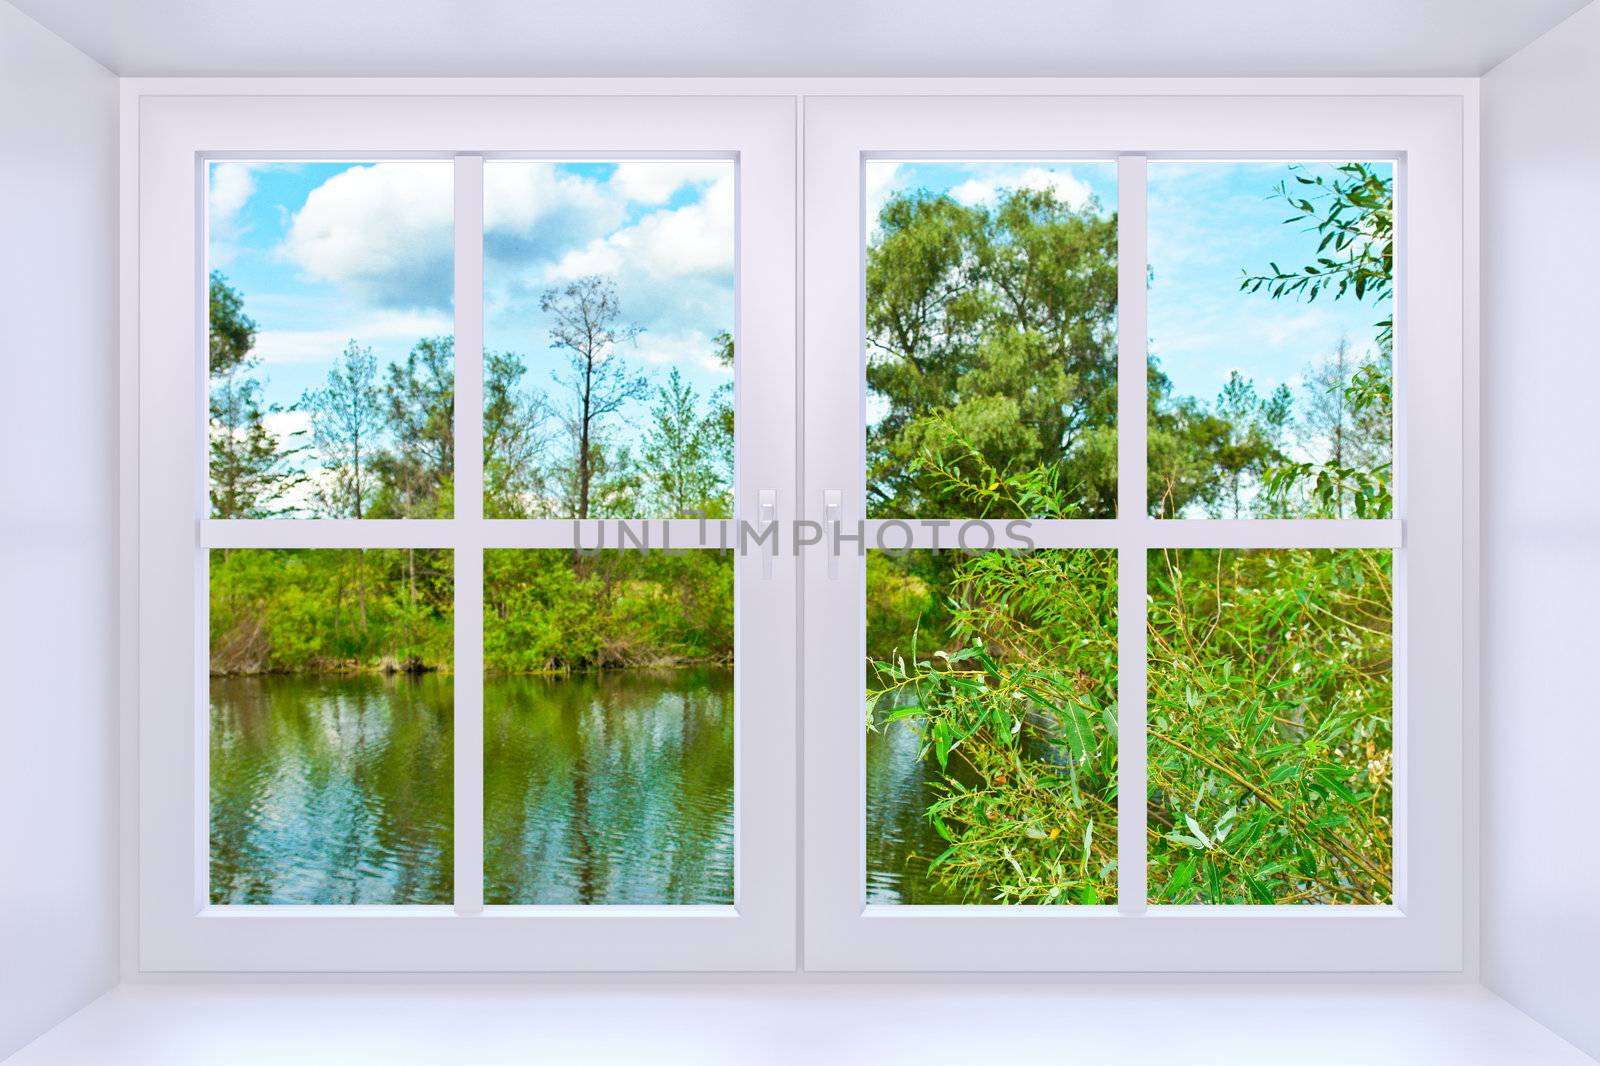 Window to nature by richwolf